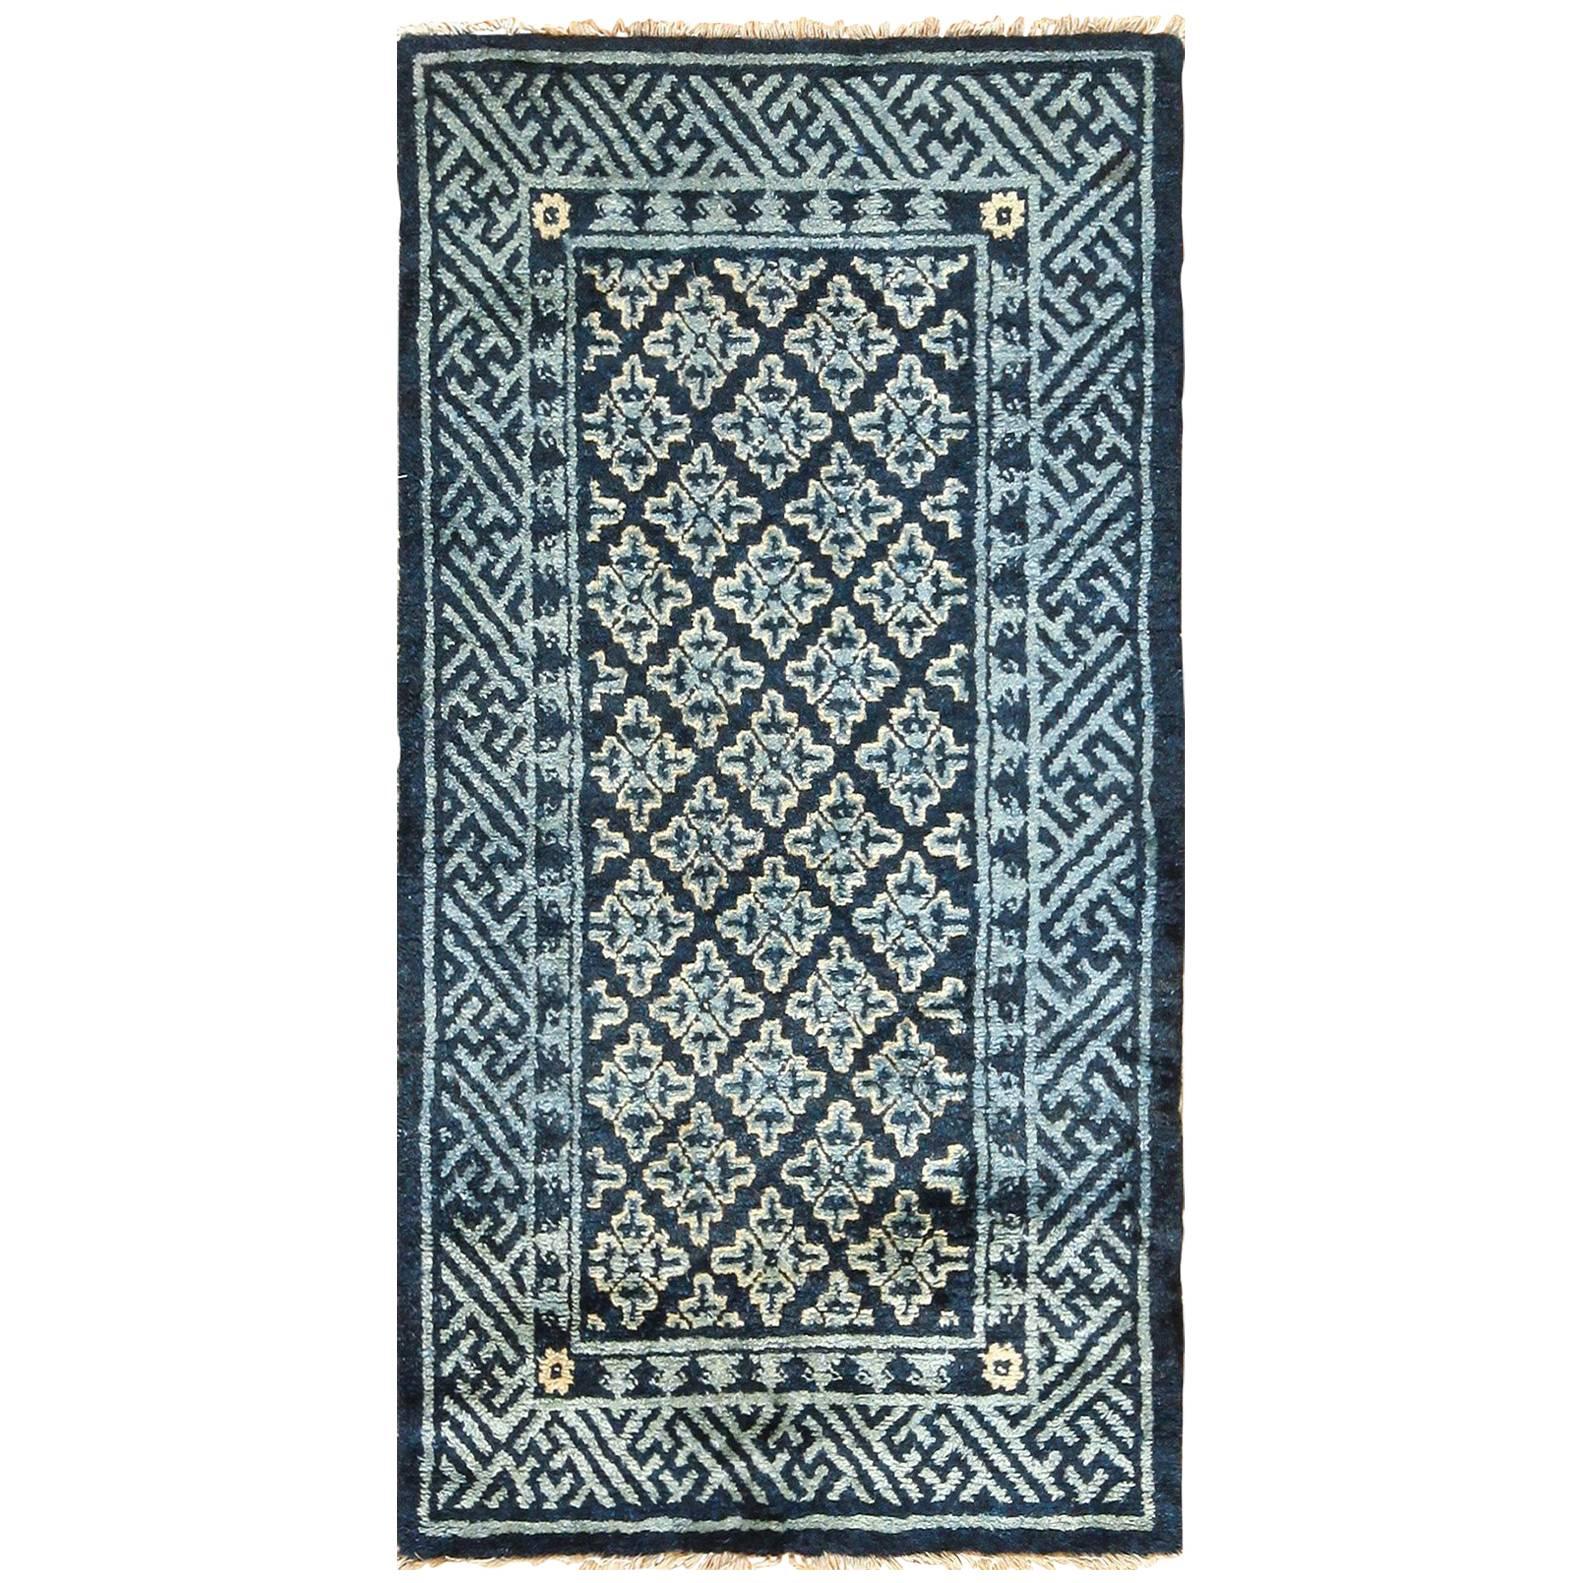 Small Scatter Size Blue Antique Chinese Rug